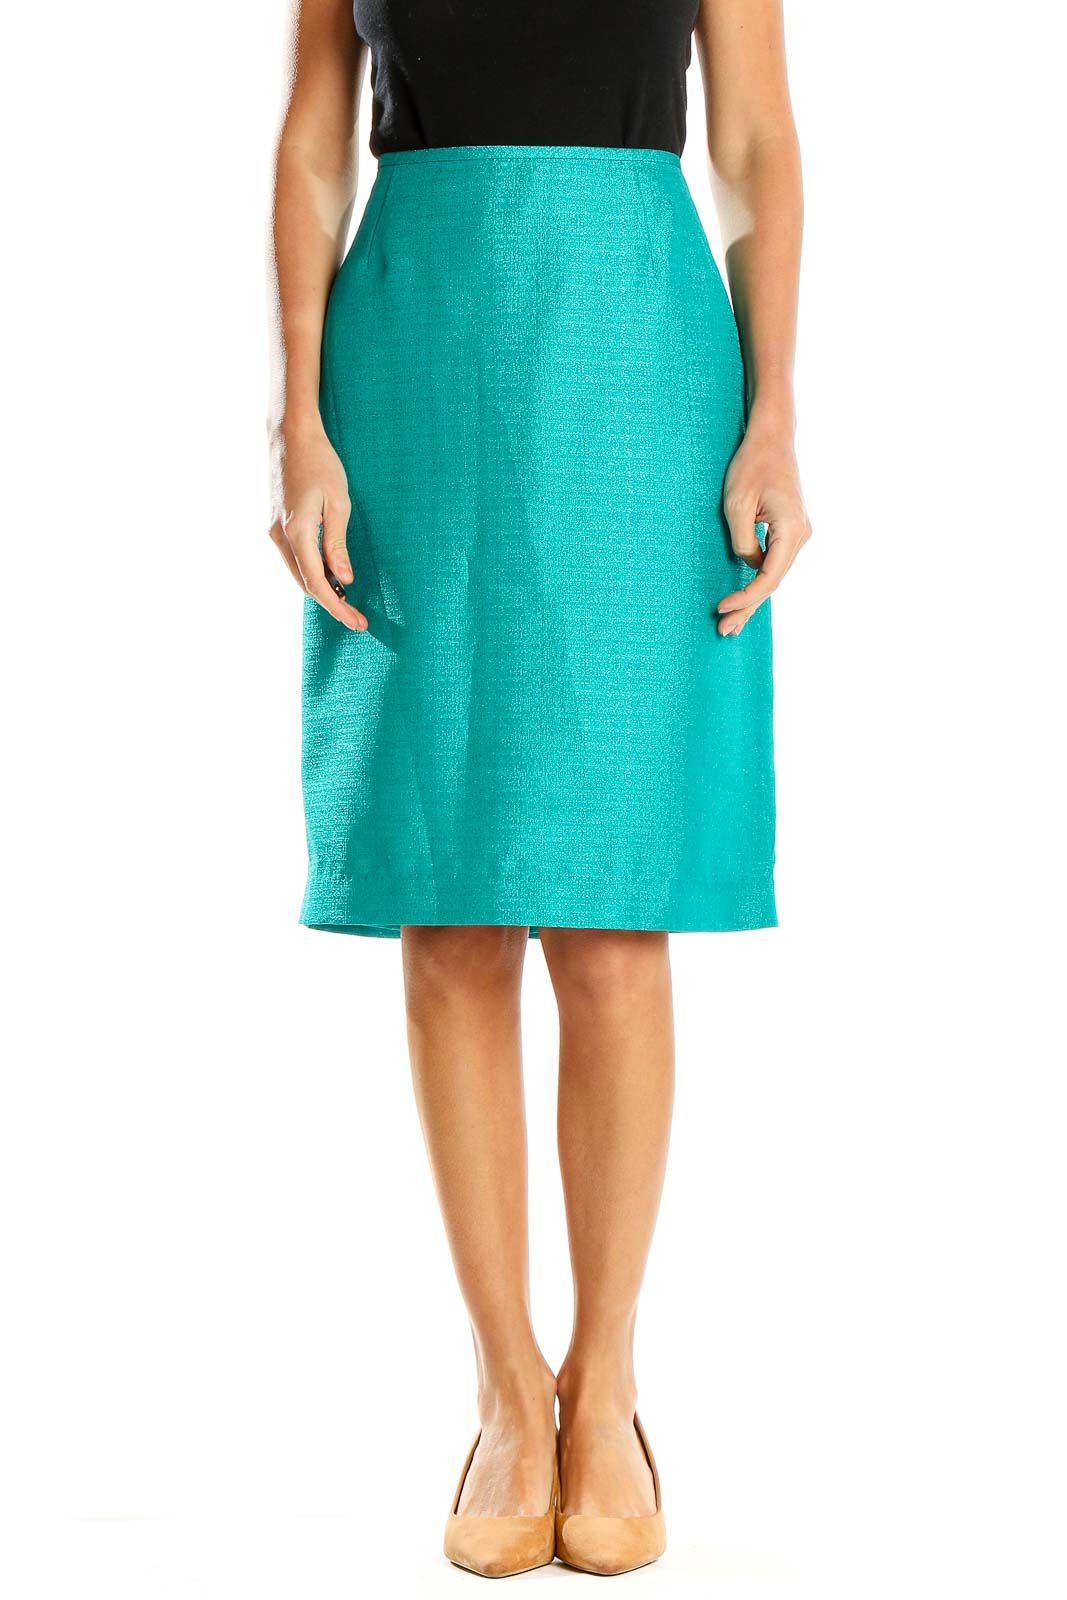 Blue Textured Classic Pencil Skirt Front